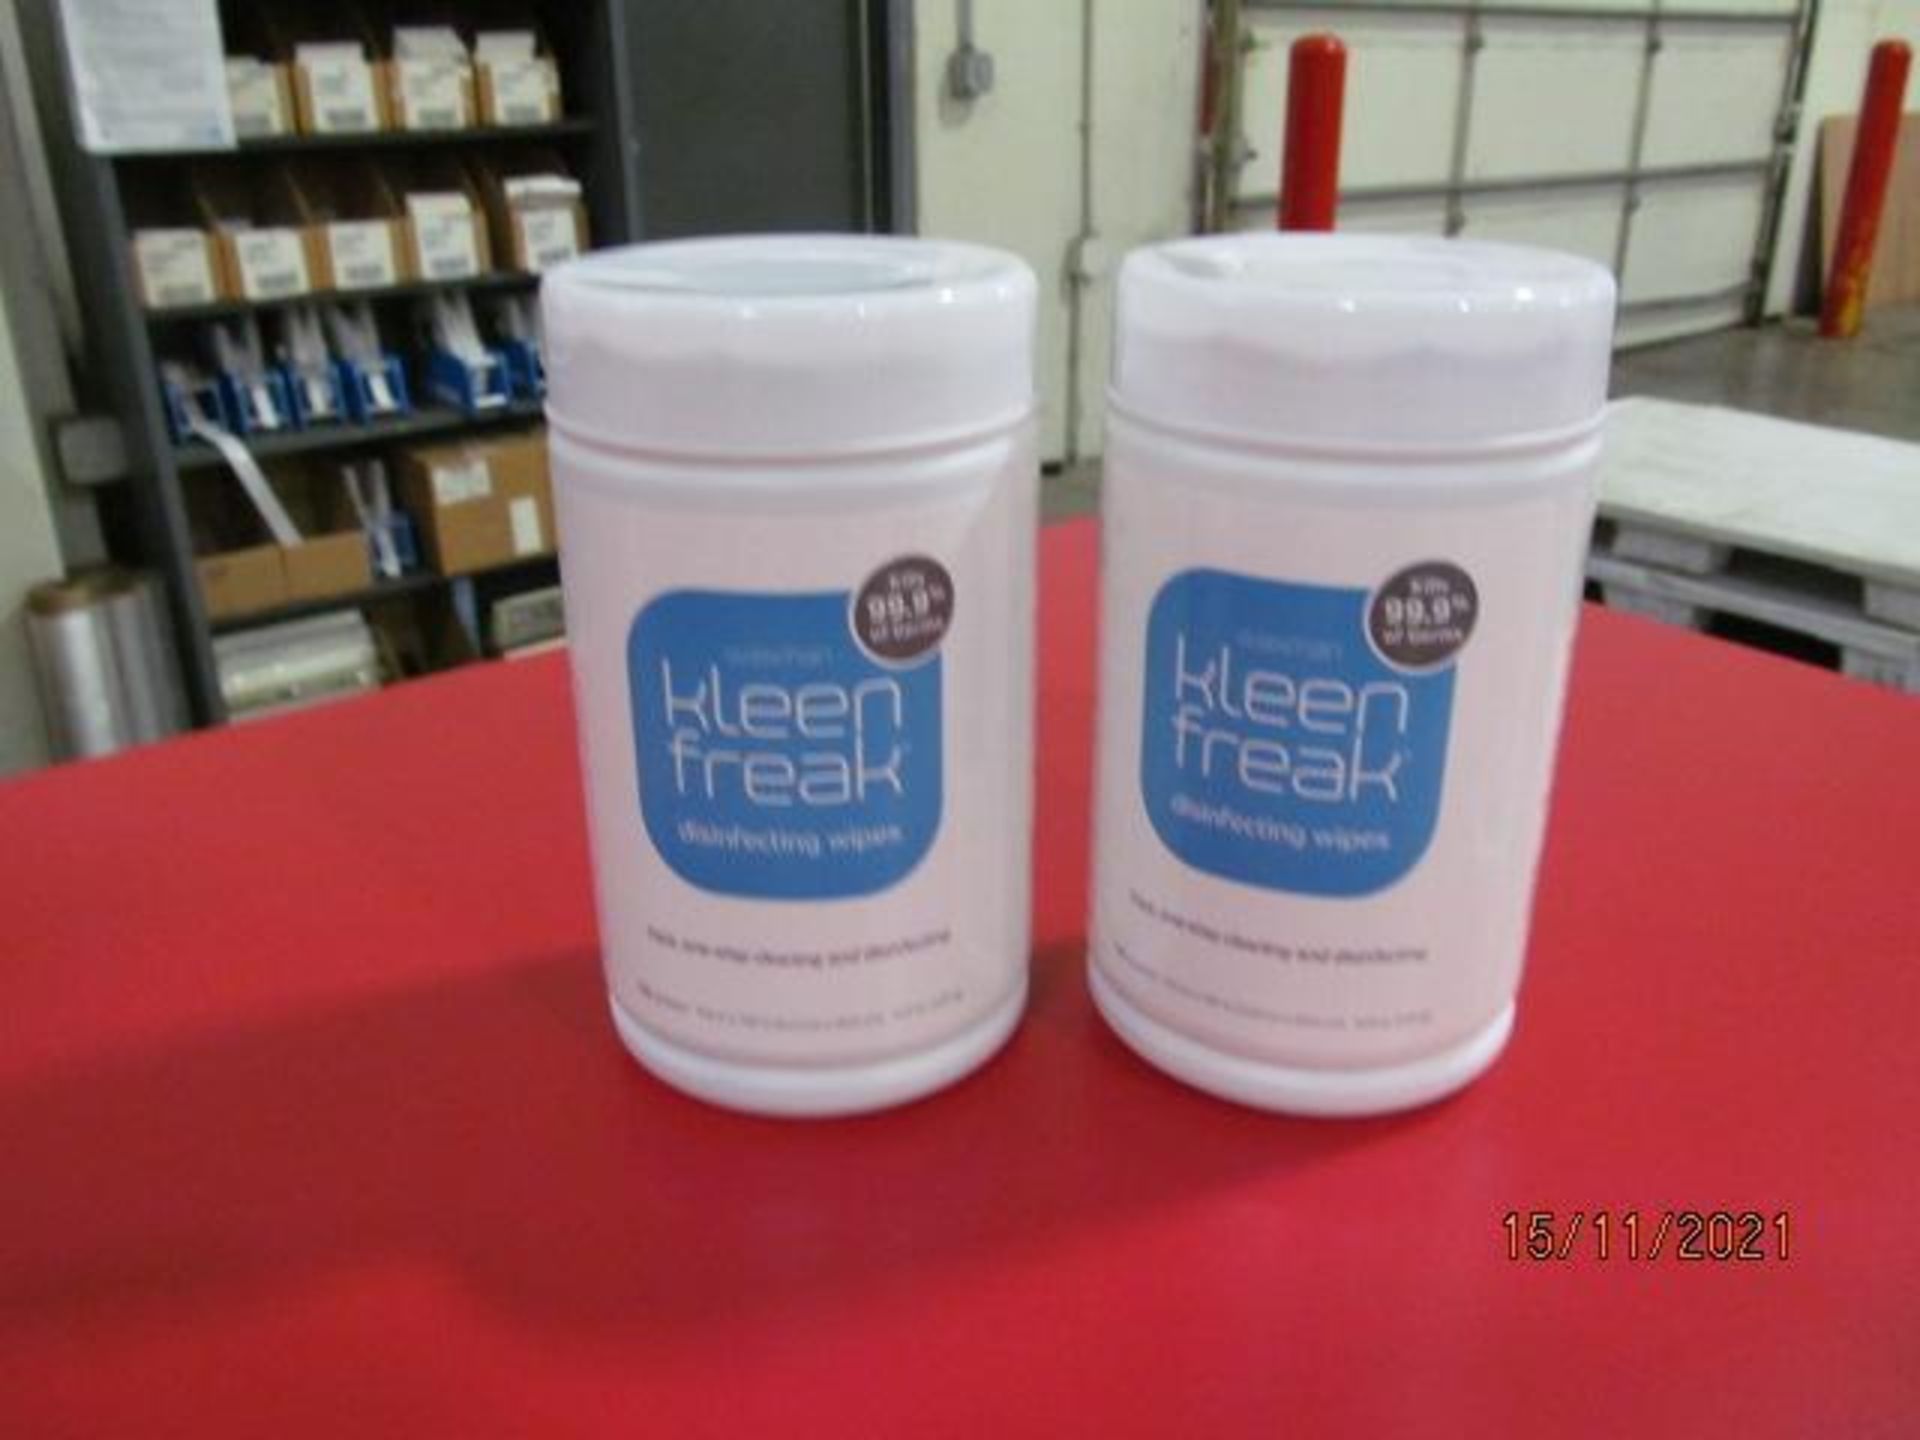 Lot of Waxman Kleen Freak Sanitizing Wipes consisting of 134,784 packages on 208 pallets. Each packa - Image 4 of 11